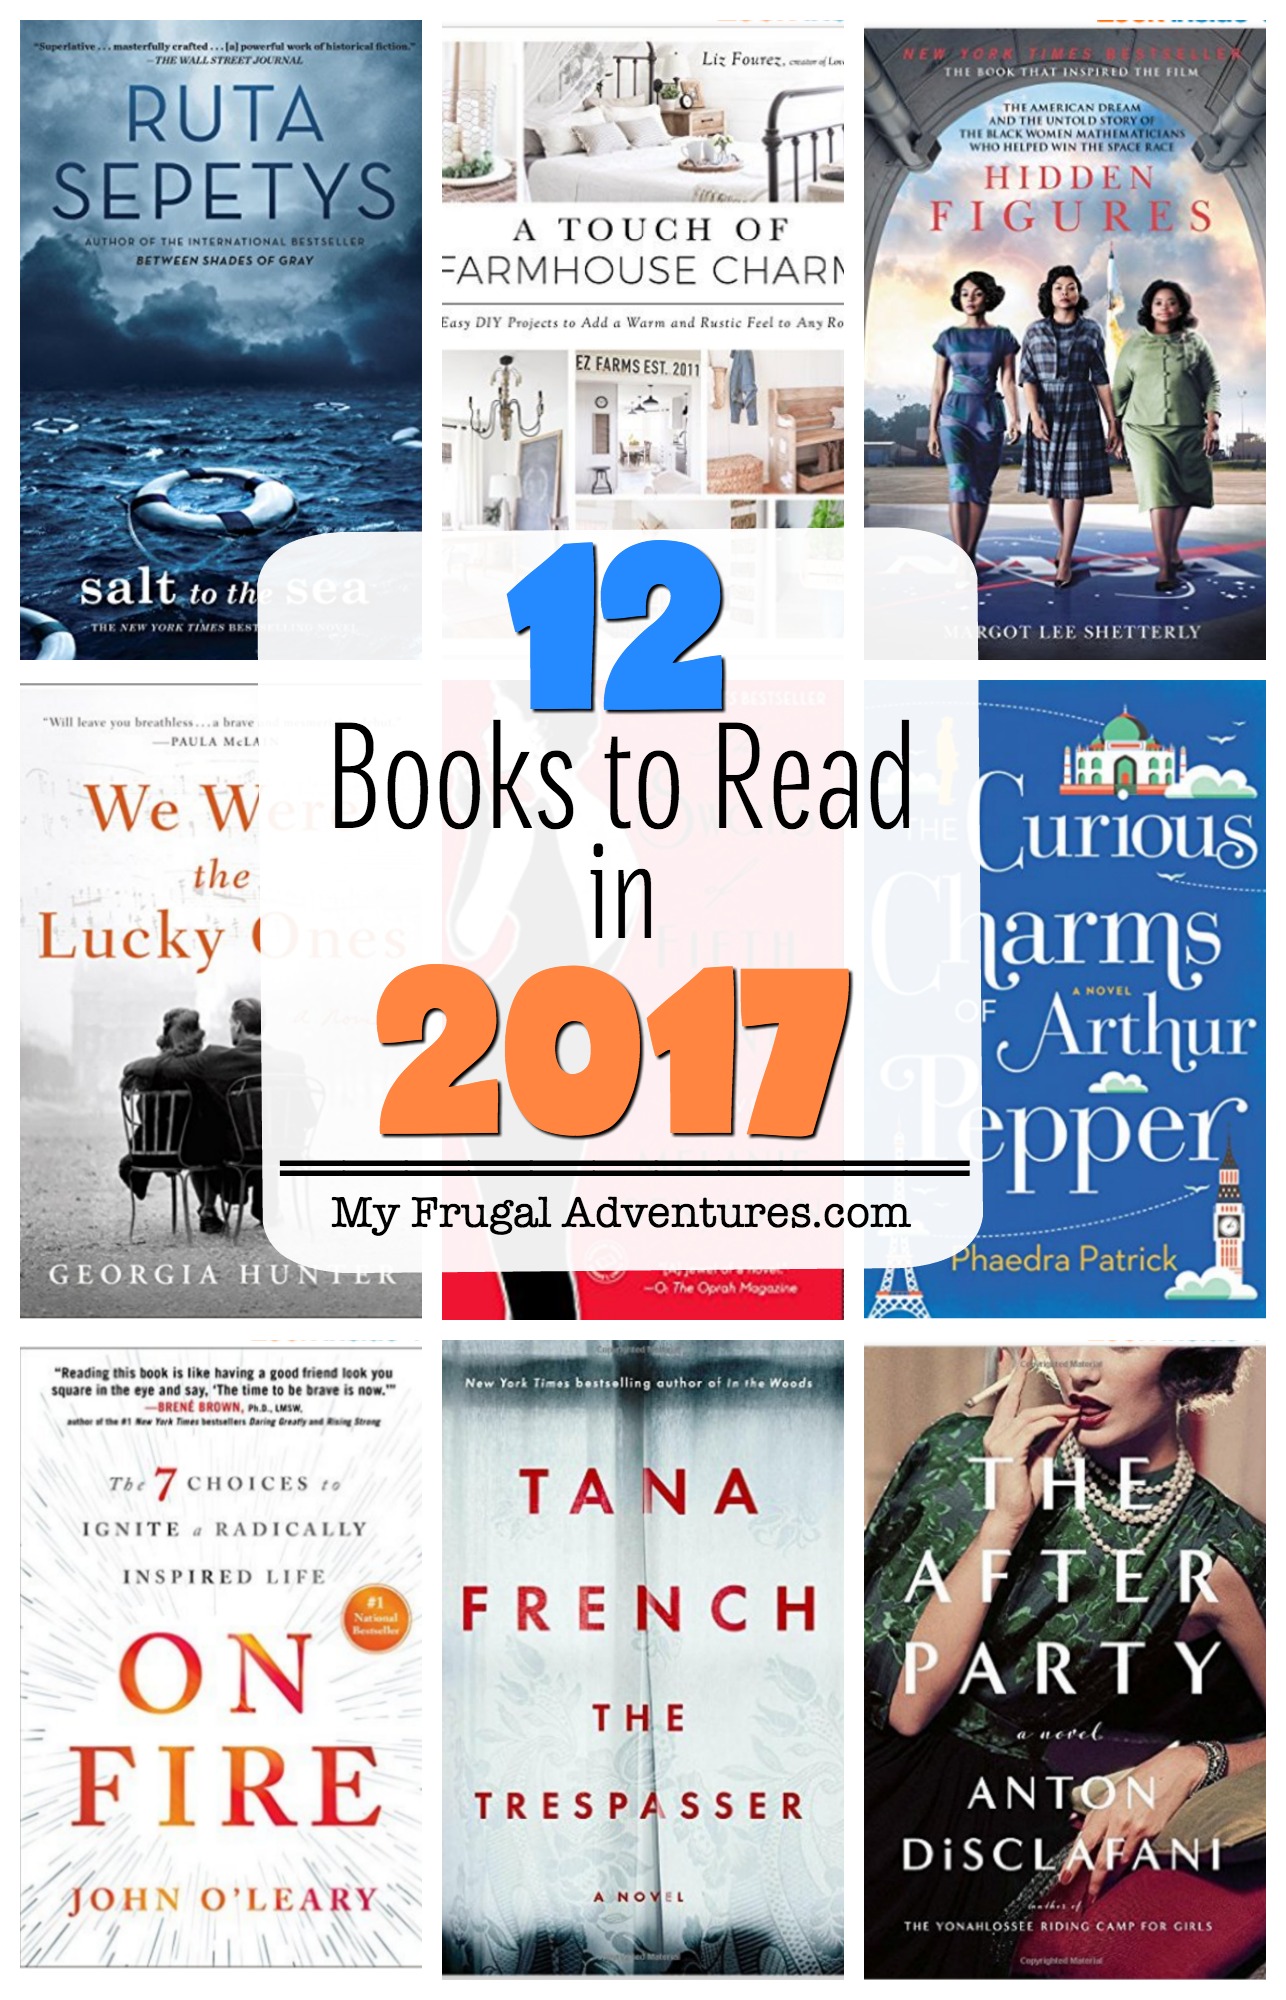 books-to-read-in-2017